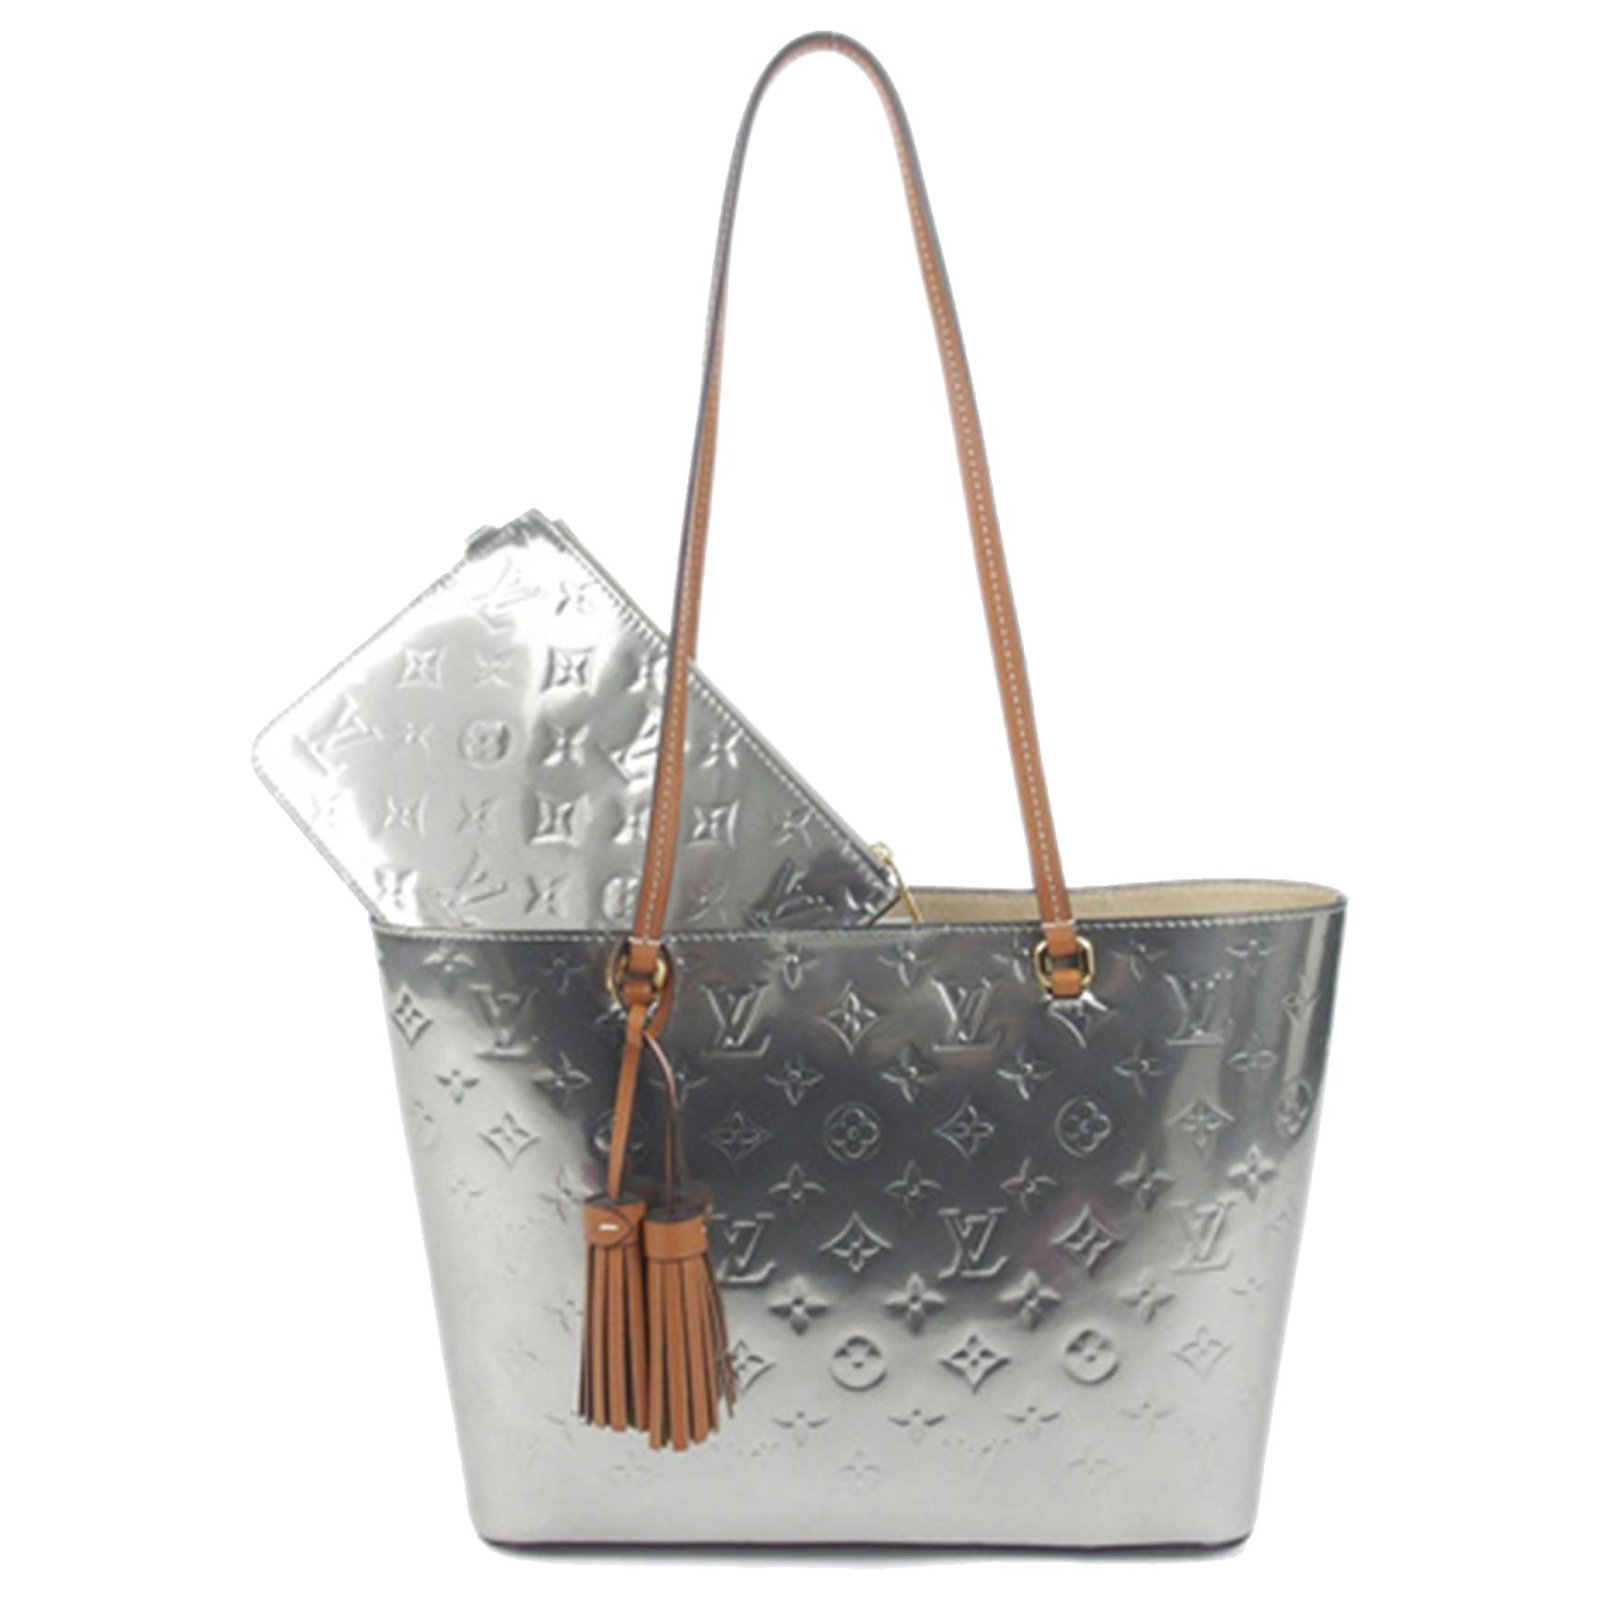 Long Beach patent leather tote